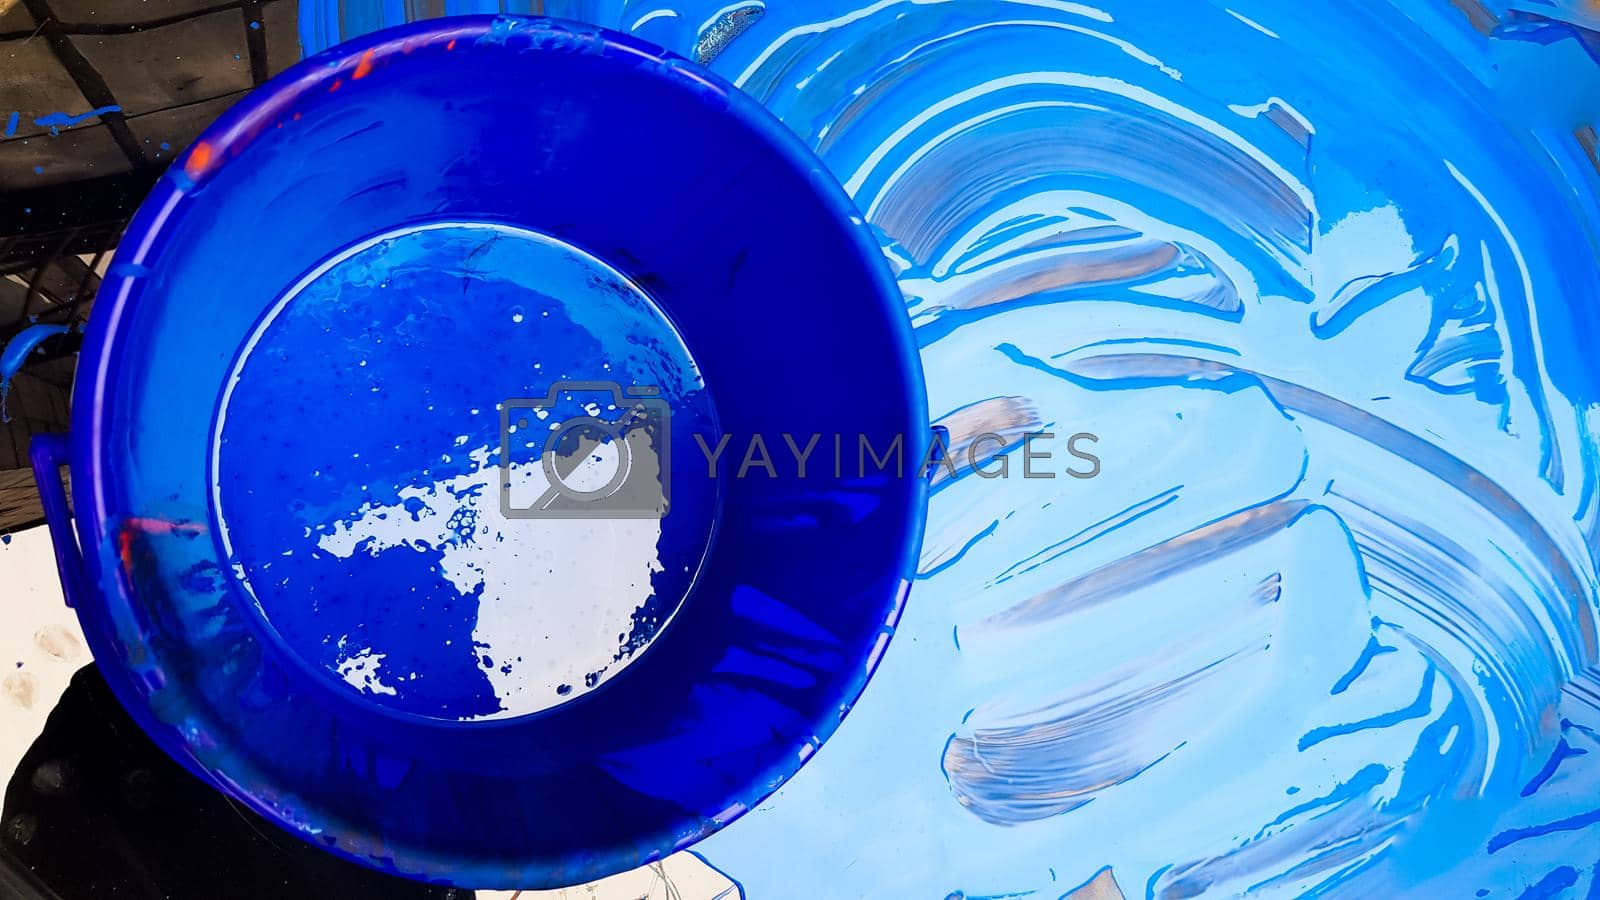 Royalty free image of Abstract background of spilled blue paint with buckets on a black background. Blue paint is pouring on a black background. Use it for an artist or creative concept. Paints spilled blue background by Roshchyn